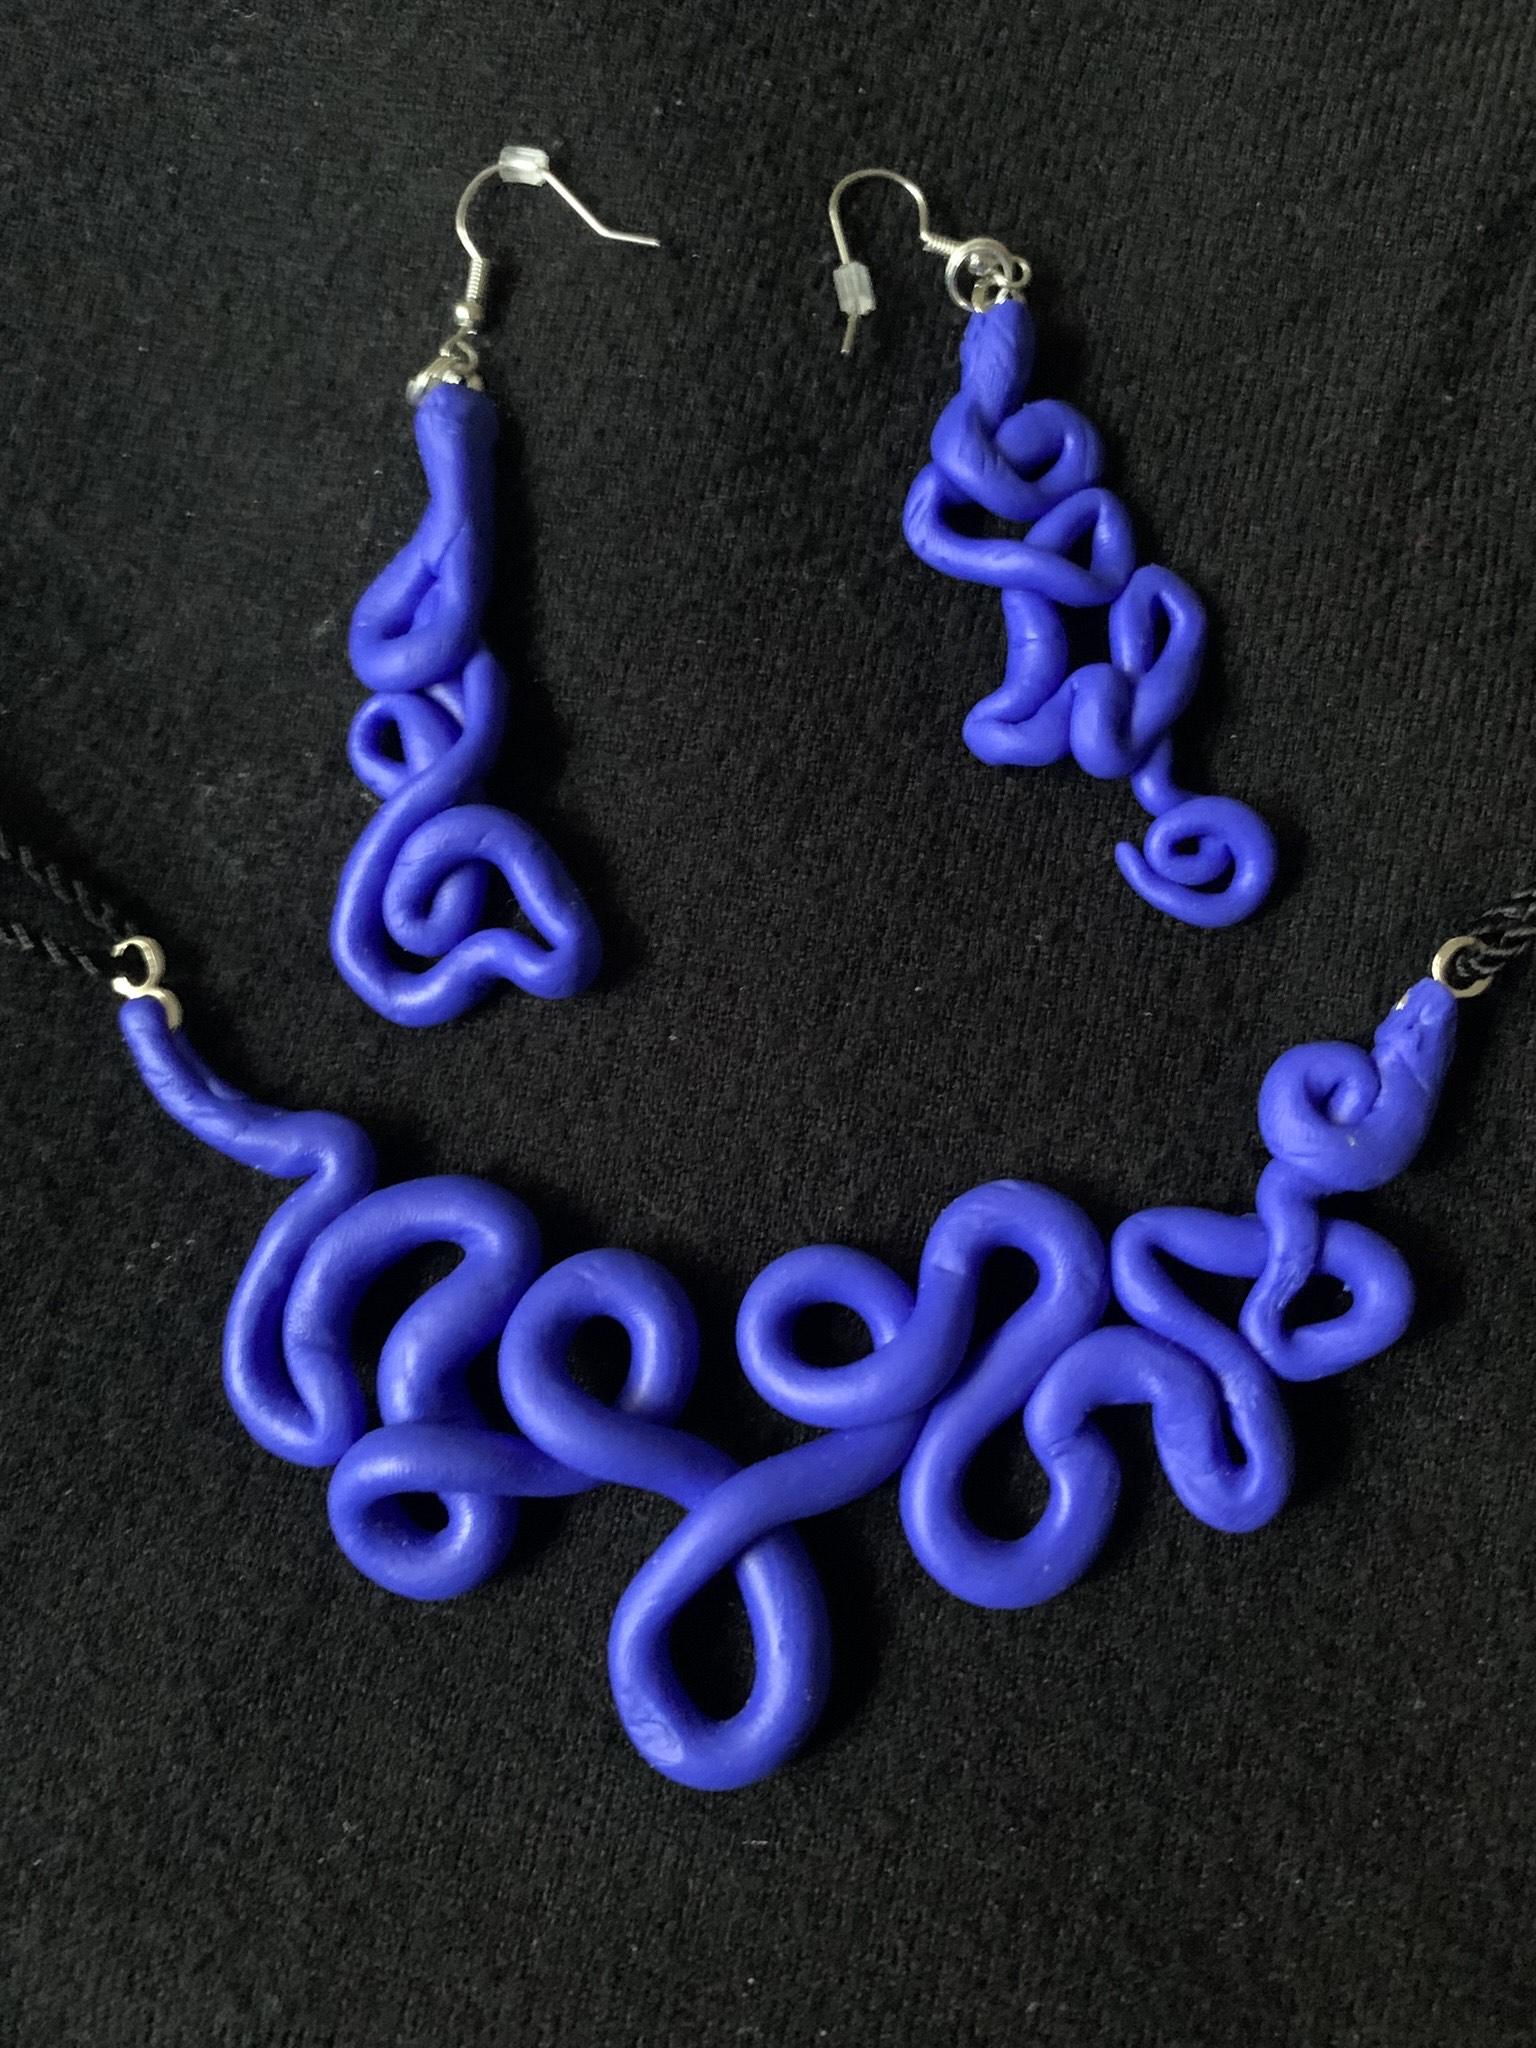 Polymer Clay Necklace and Earrings